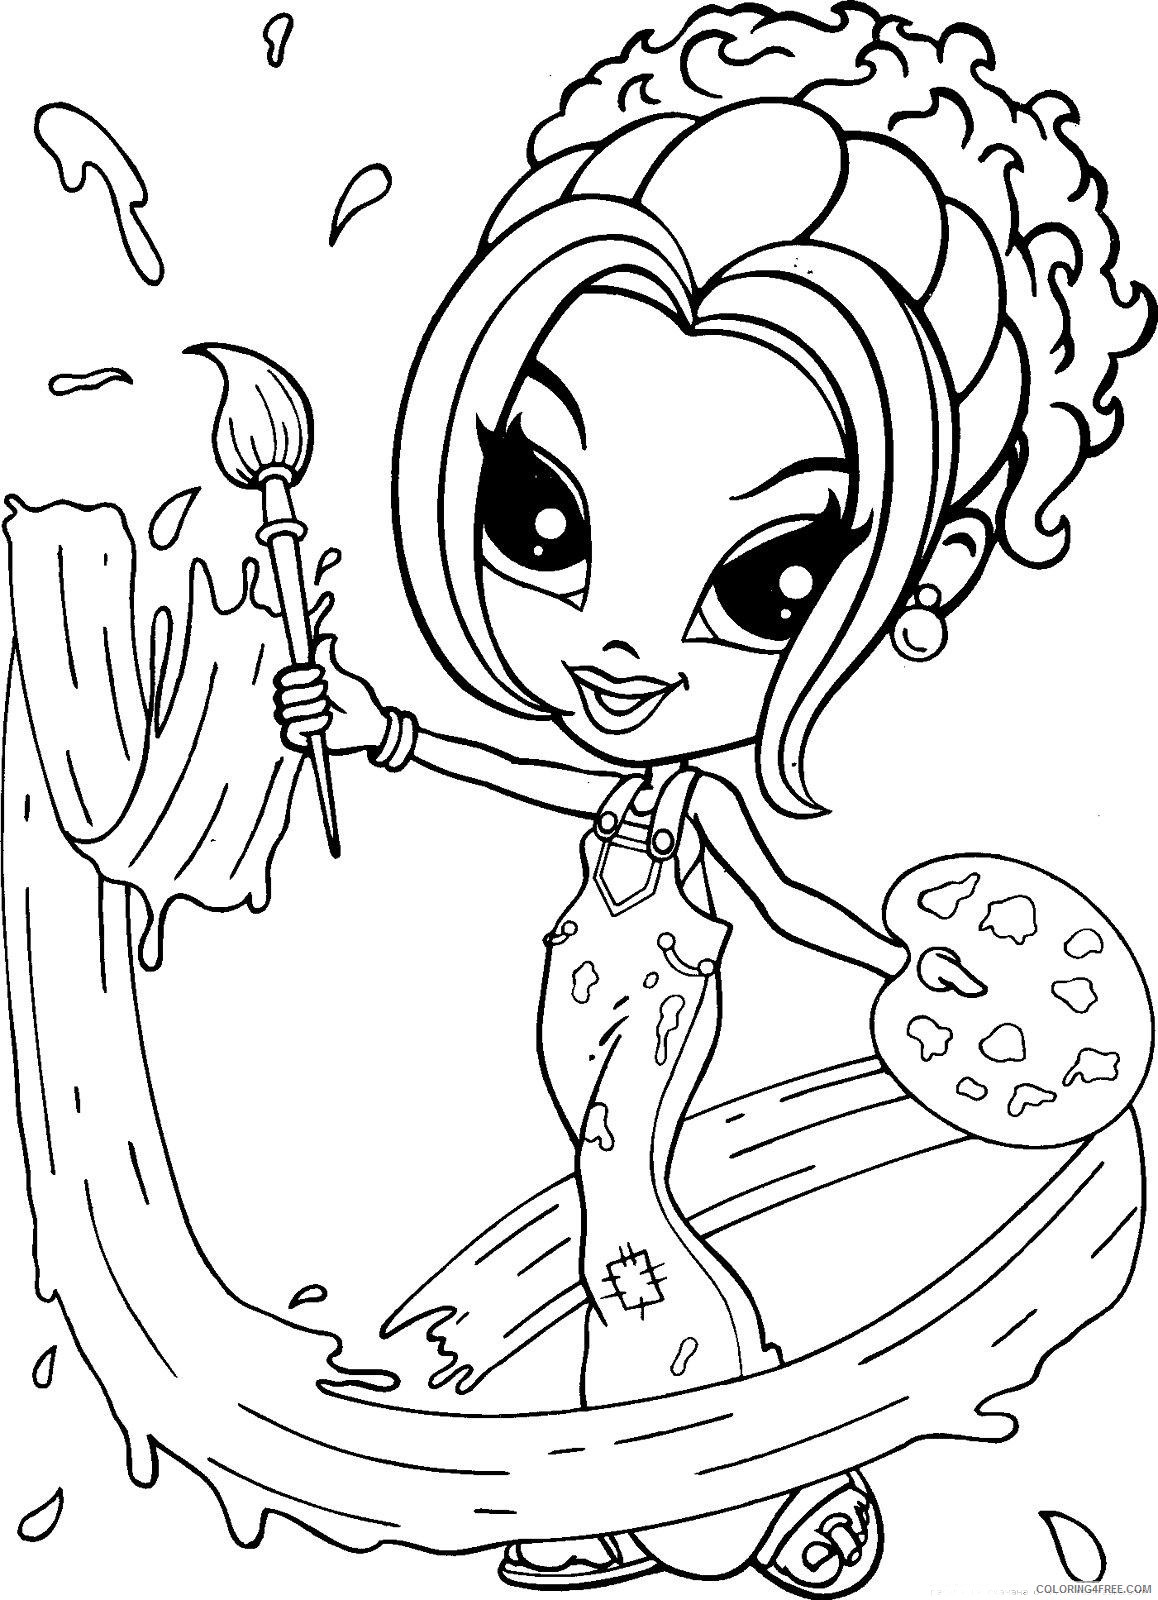 Featured image of post Lisa Frank Coloring Pages Girls Looking for cartoon coloring pages download cute cartoon animal coloring pages in high resolution for free